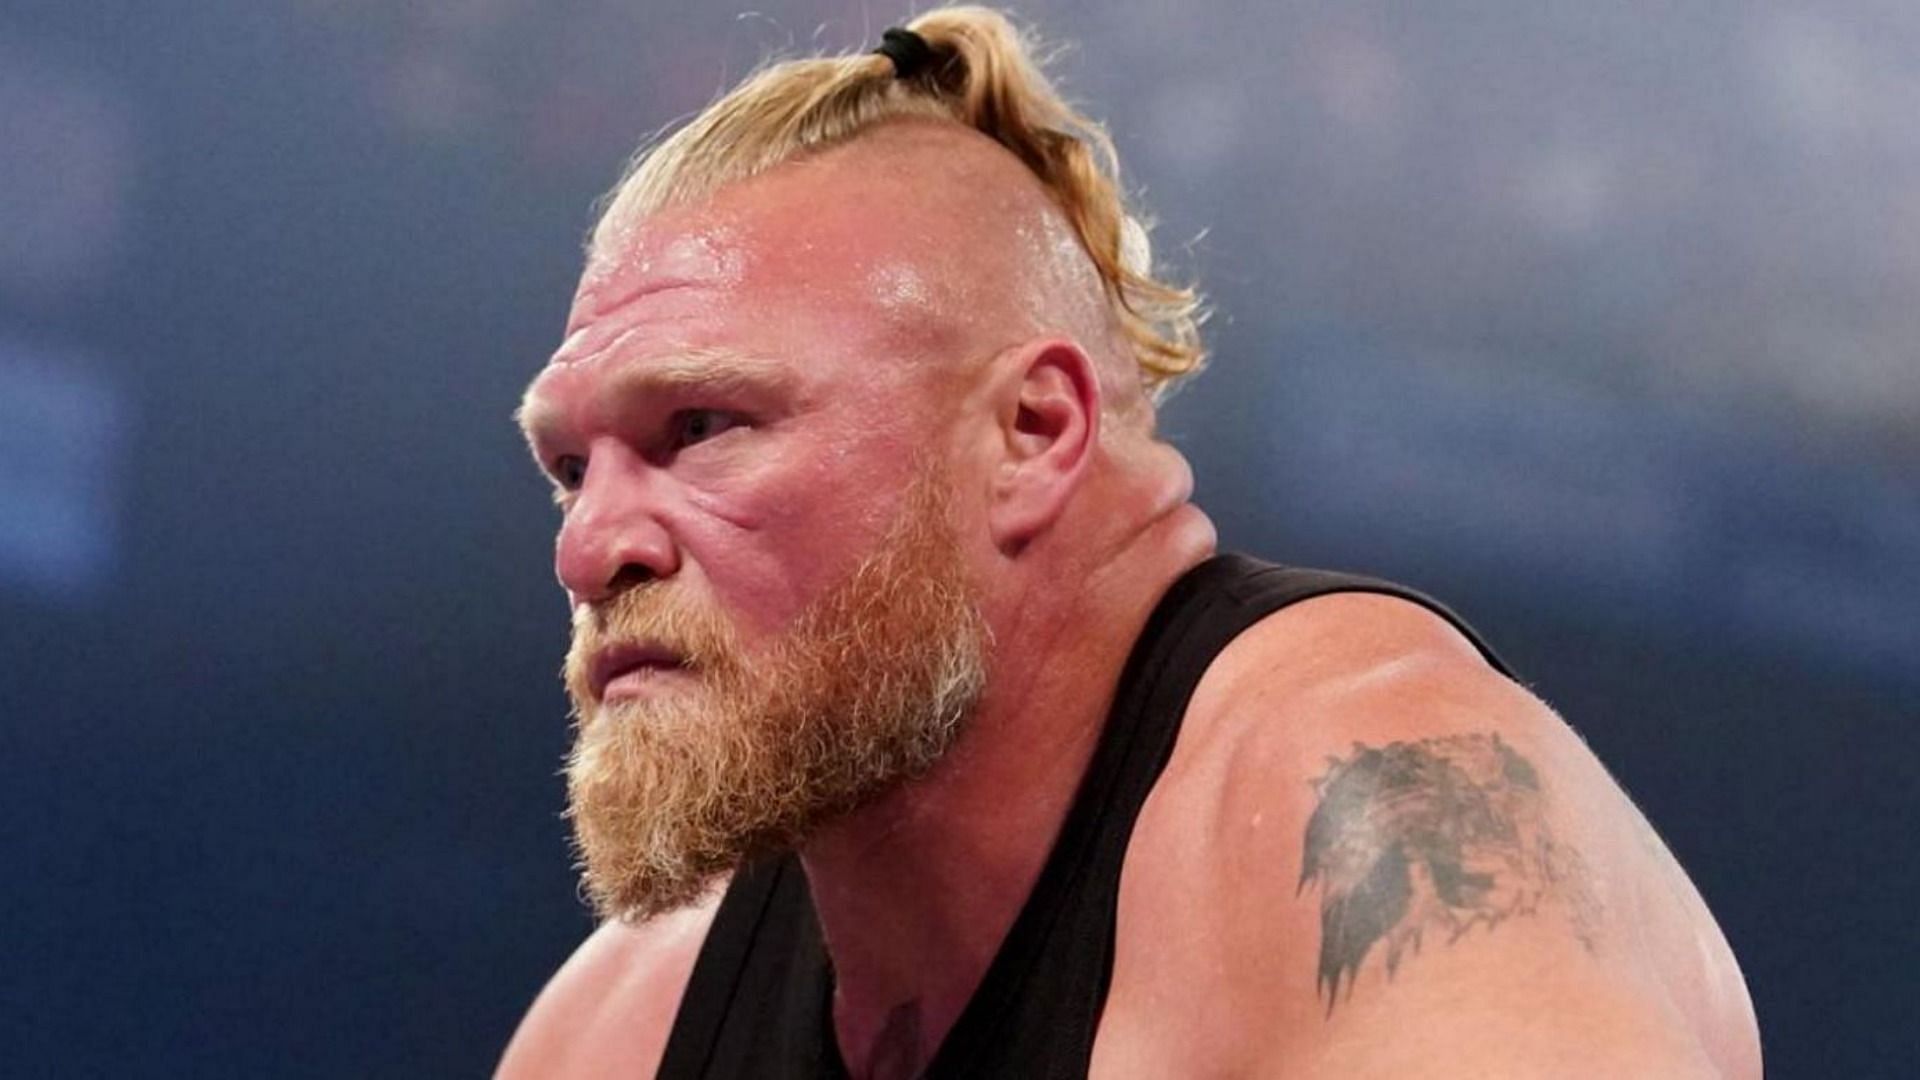 The Beast Incarnate has been one of the most dominant WWE Superstars in history.